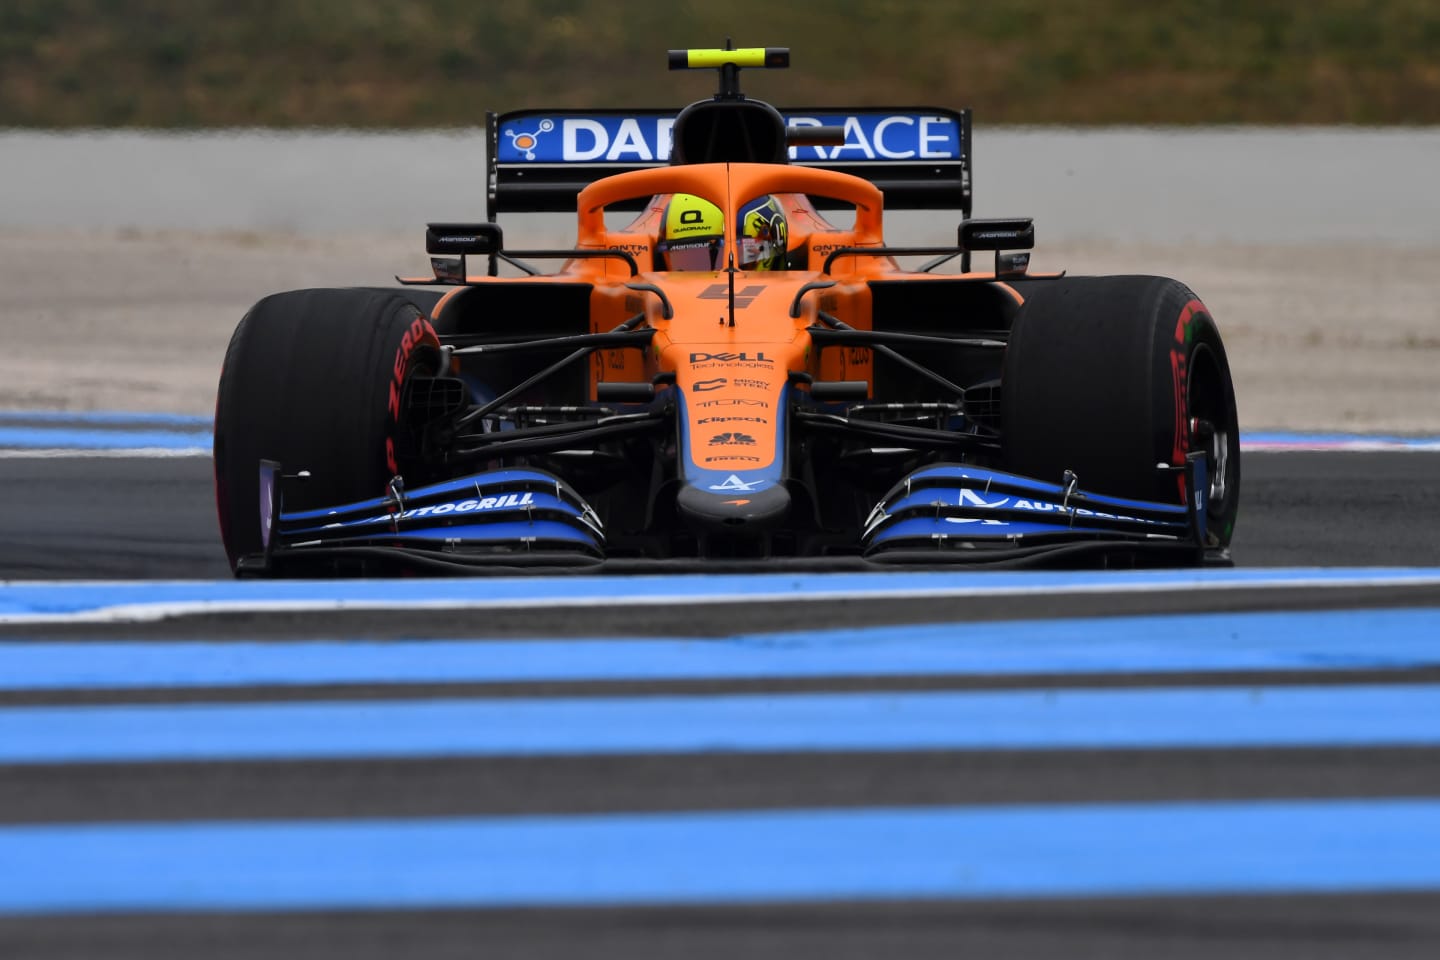 LE CASTELLET, FRANCE - JUNE 19: Lando Norris of Great Britain driving the (4) McLaren F1 Team MCL35M Mercedes on track during final practice ahead of the F1 Grand Prix of France at Circuit Paul Ricard on June 19, 2021 in Le Castellet, France. (Photo by Rudy Carezzevoli/Getty Images)